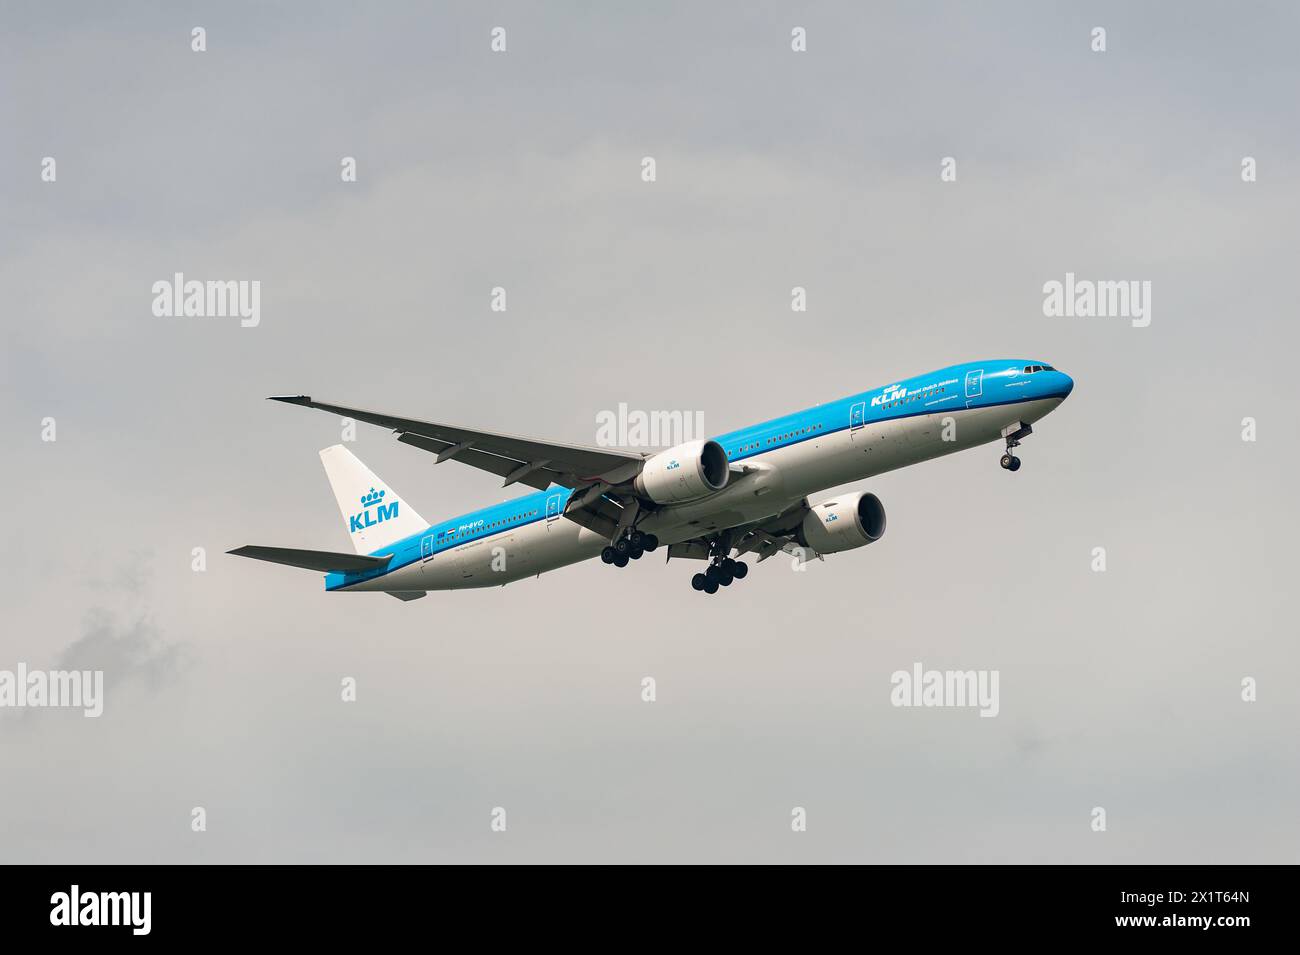 15.07.2023, Singapore, Republic of Singapore, Asia - A KLM Royal Dutch Airlines Boeing 777-300 ER passenger aircraft with the registration PH-BVO appr Stock Photo